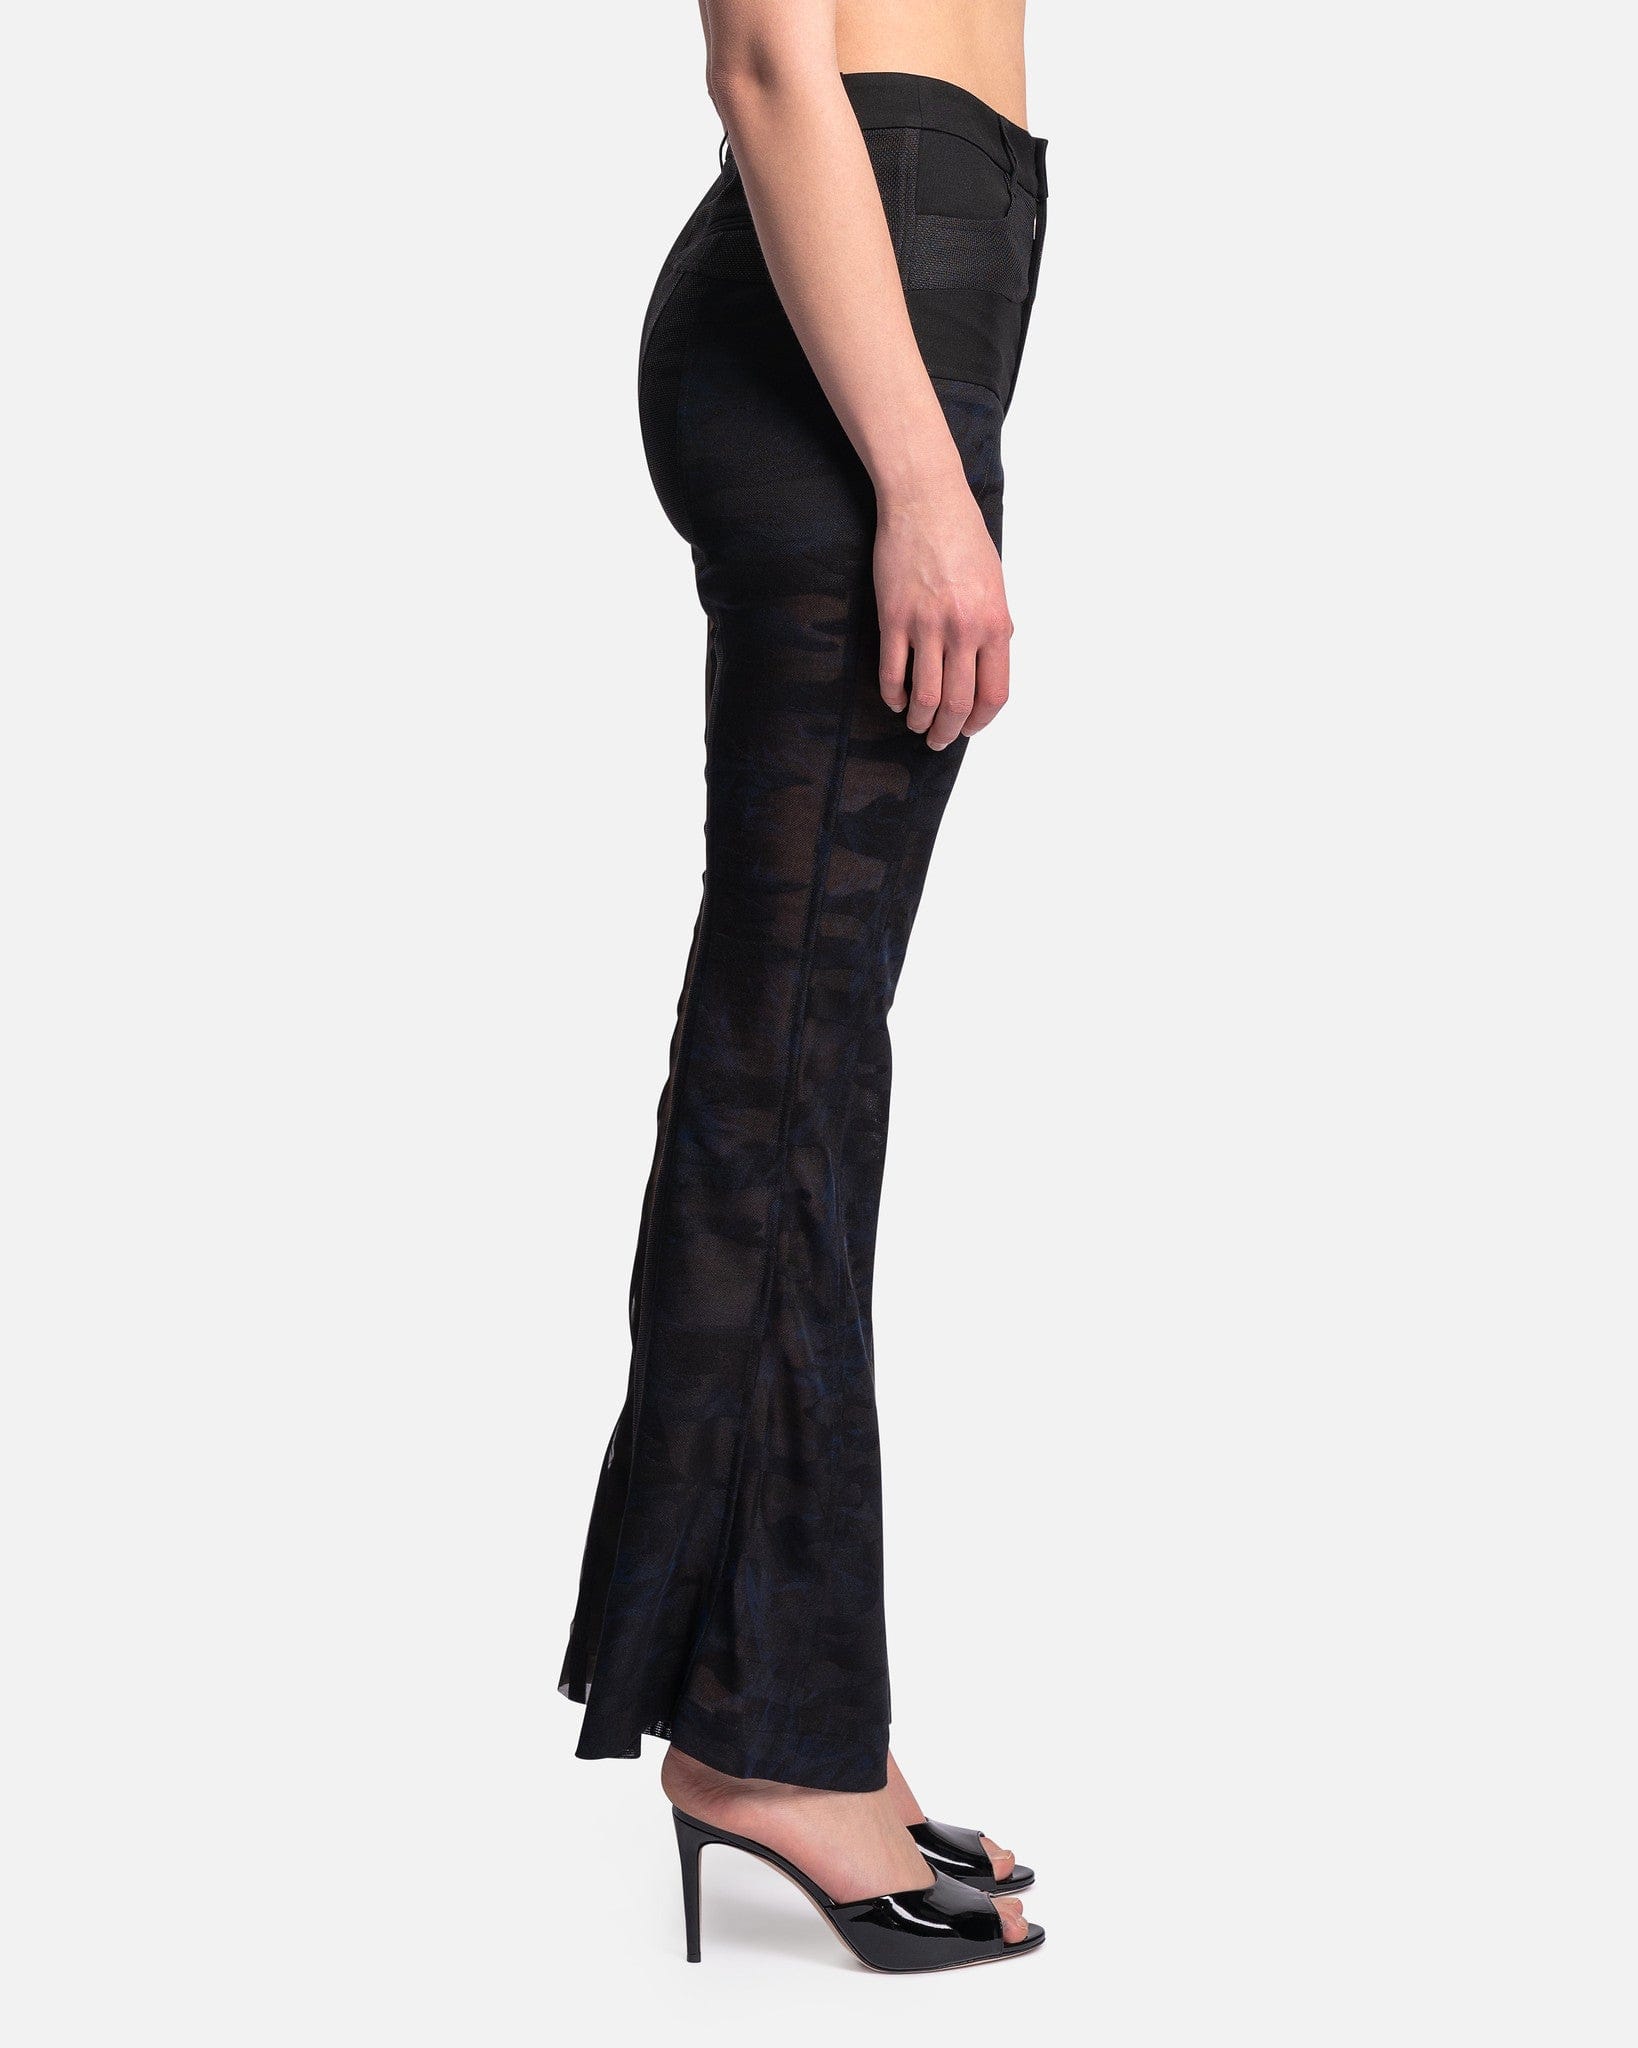 Feng Chen Wang Women Pants Translucent Flared Trousers in Black